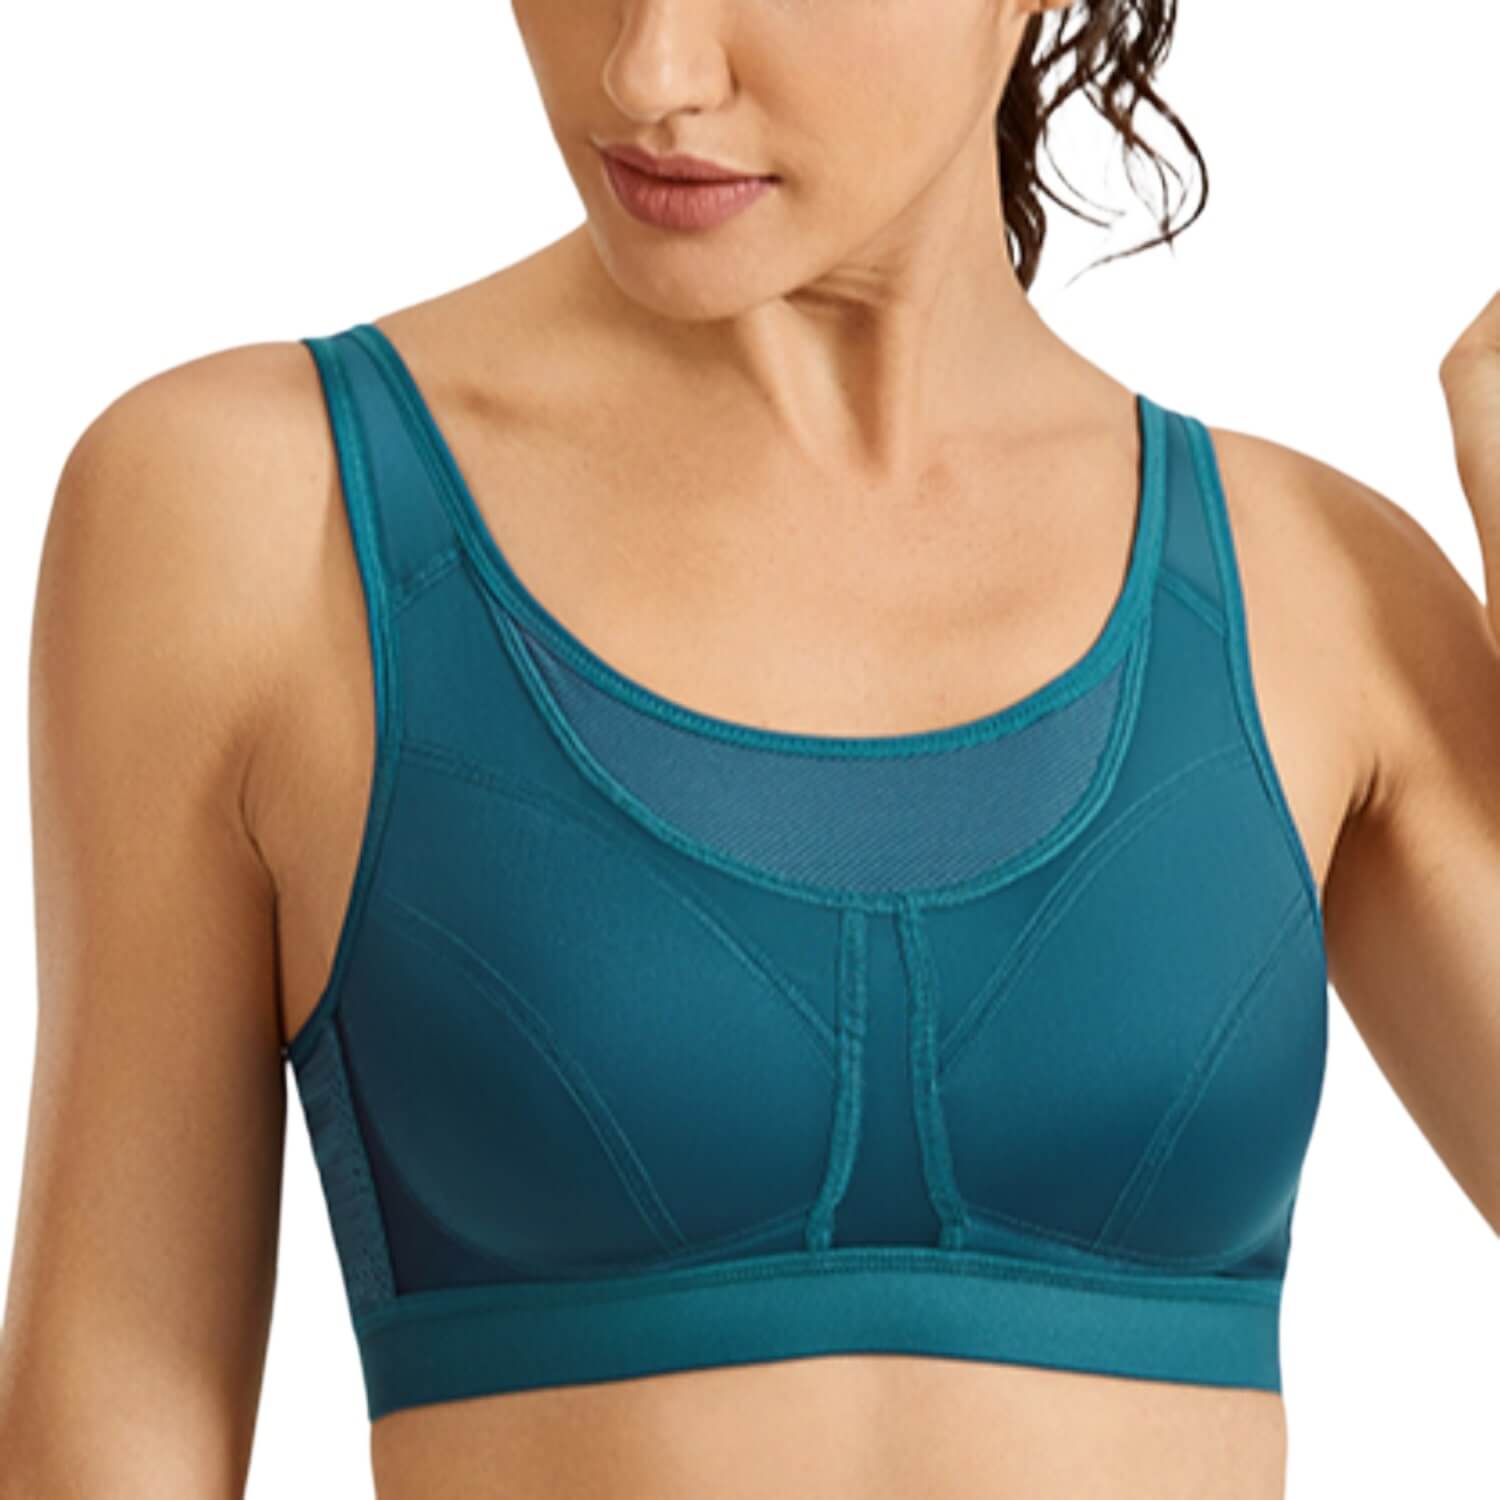 Women's Summer Ultra-thin Invisible Underwear, Push Up Sports Bra For Small  Chest, Anti-sagging And Side Boob Coverage, Wire-free